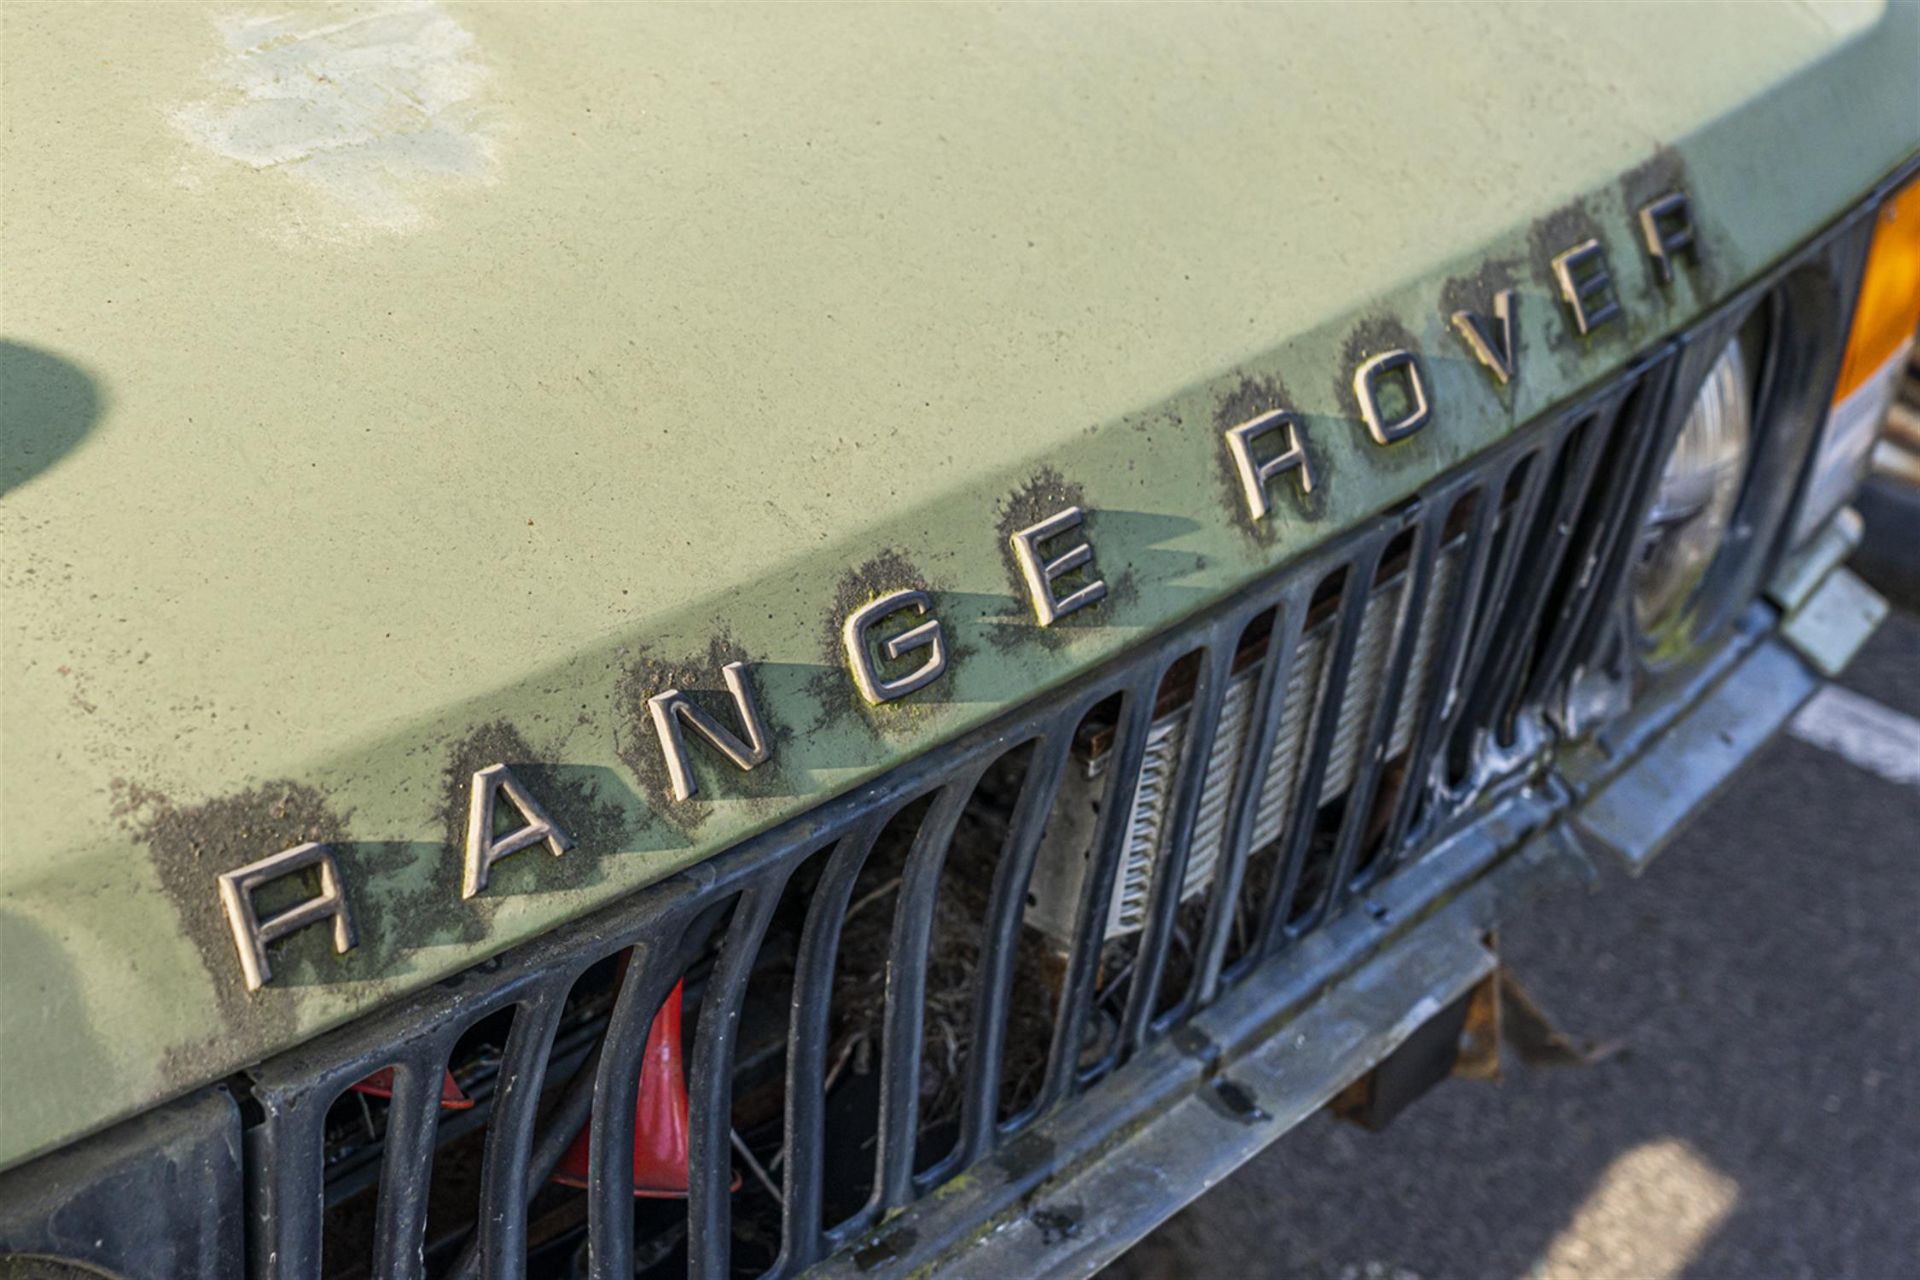 1975 Range Rover 'Suffix D' - Image 5 of 5